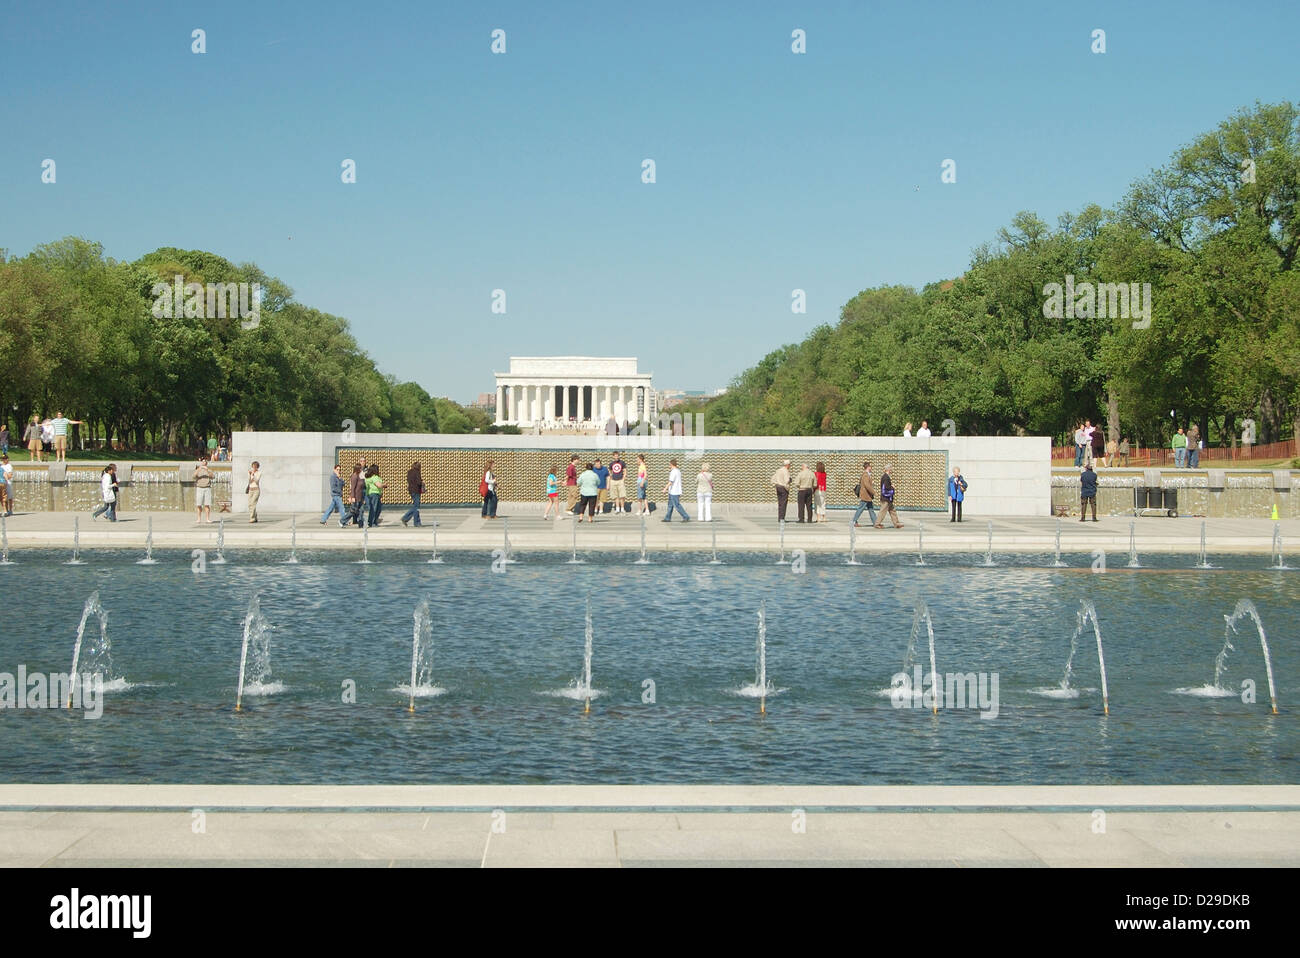 View Across The Fountains Of The World War Ii Memorial To The Lincoln Memorial On The Mall In Washington Stock Photo